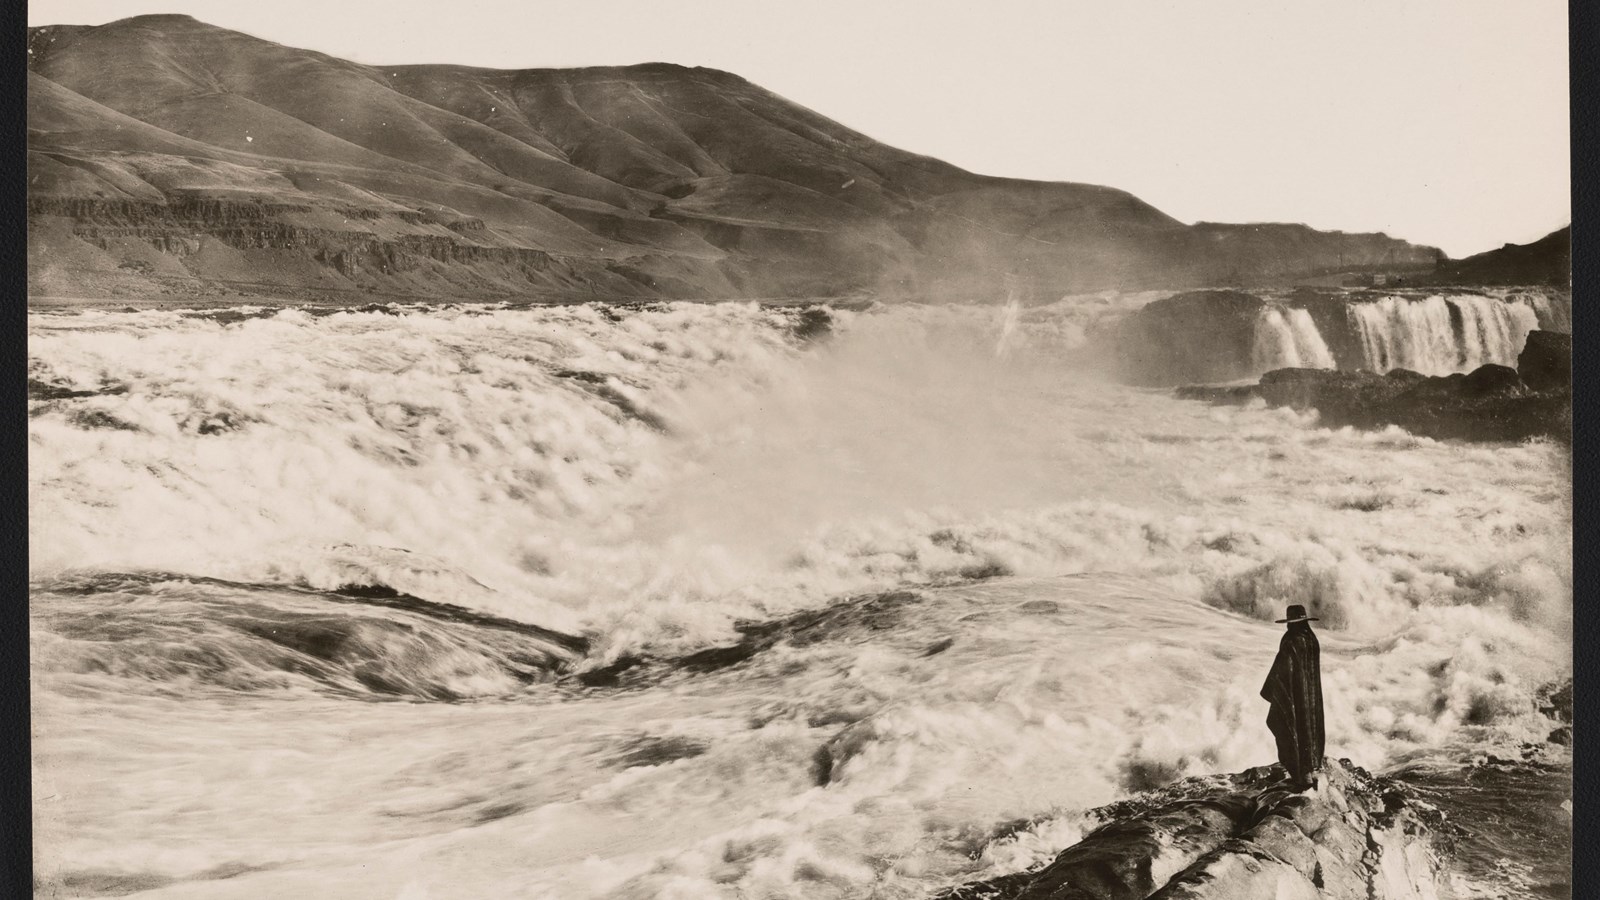 Waterfall churning water over rocks. Man stands in foreground. 